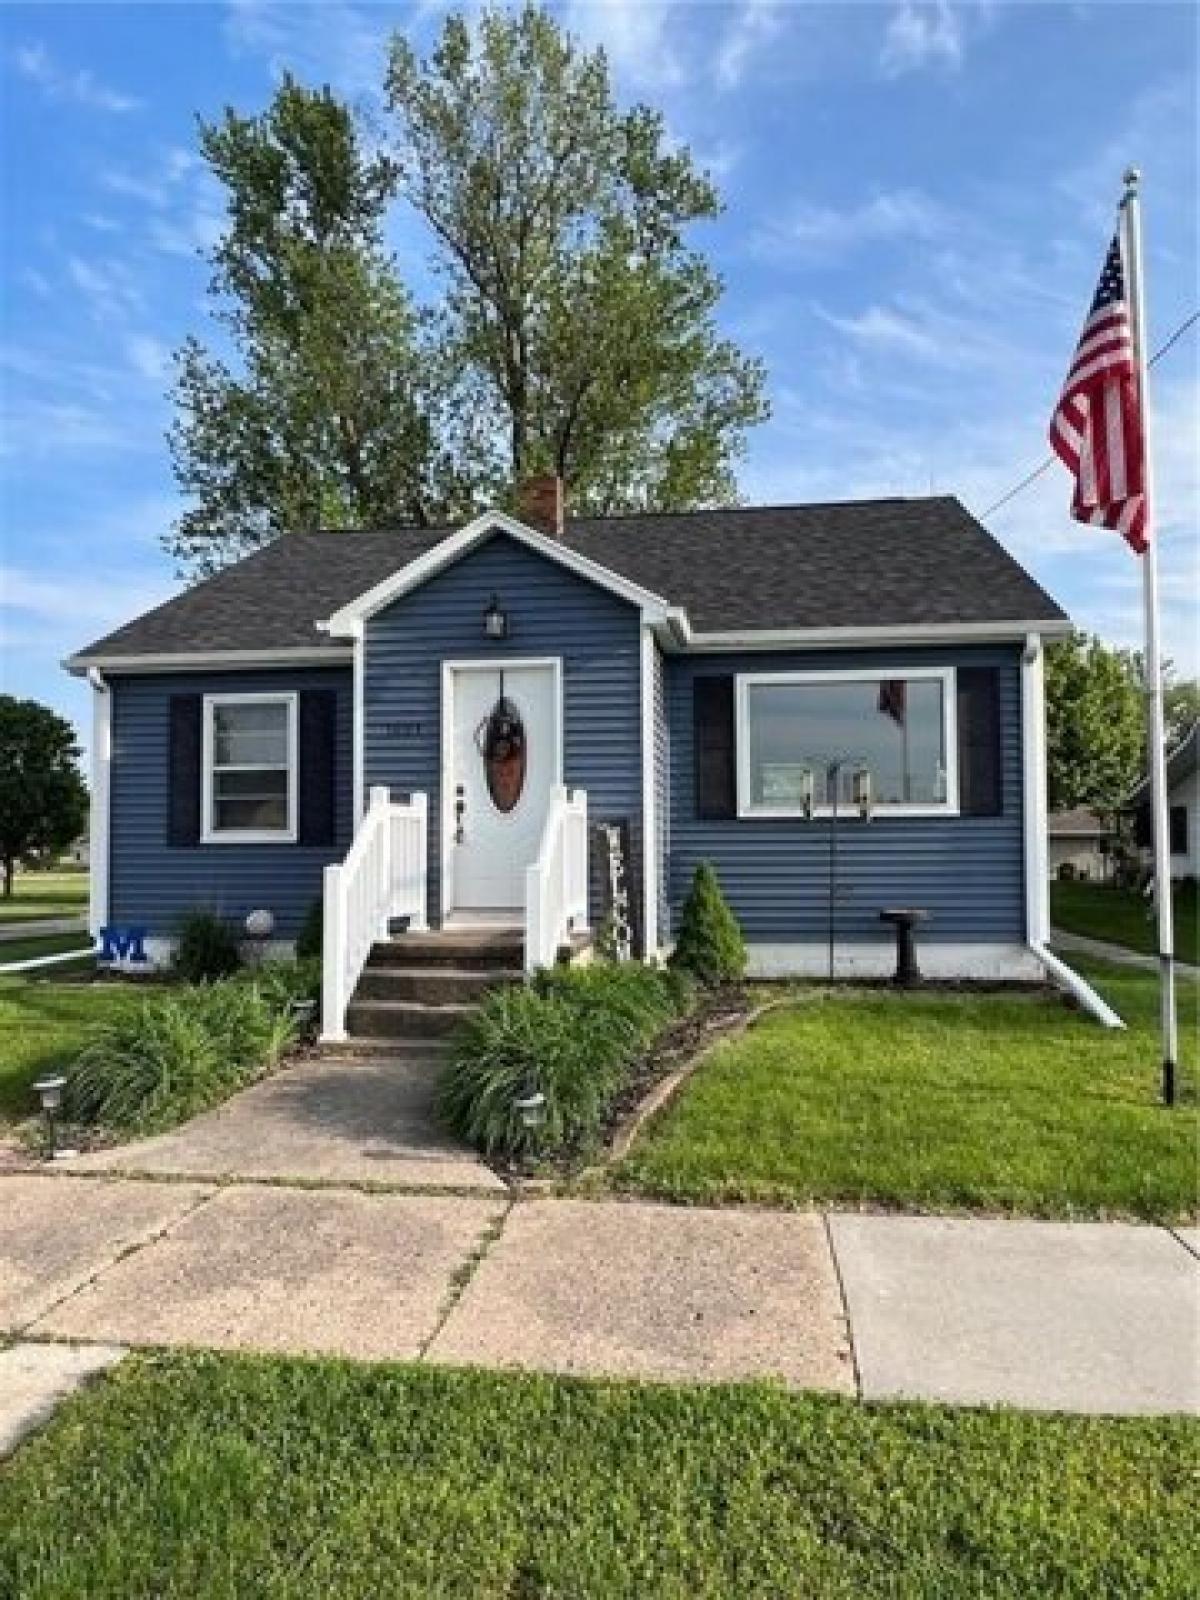 Picture of Home For Sale in Sully, Iowa, United States